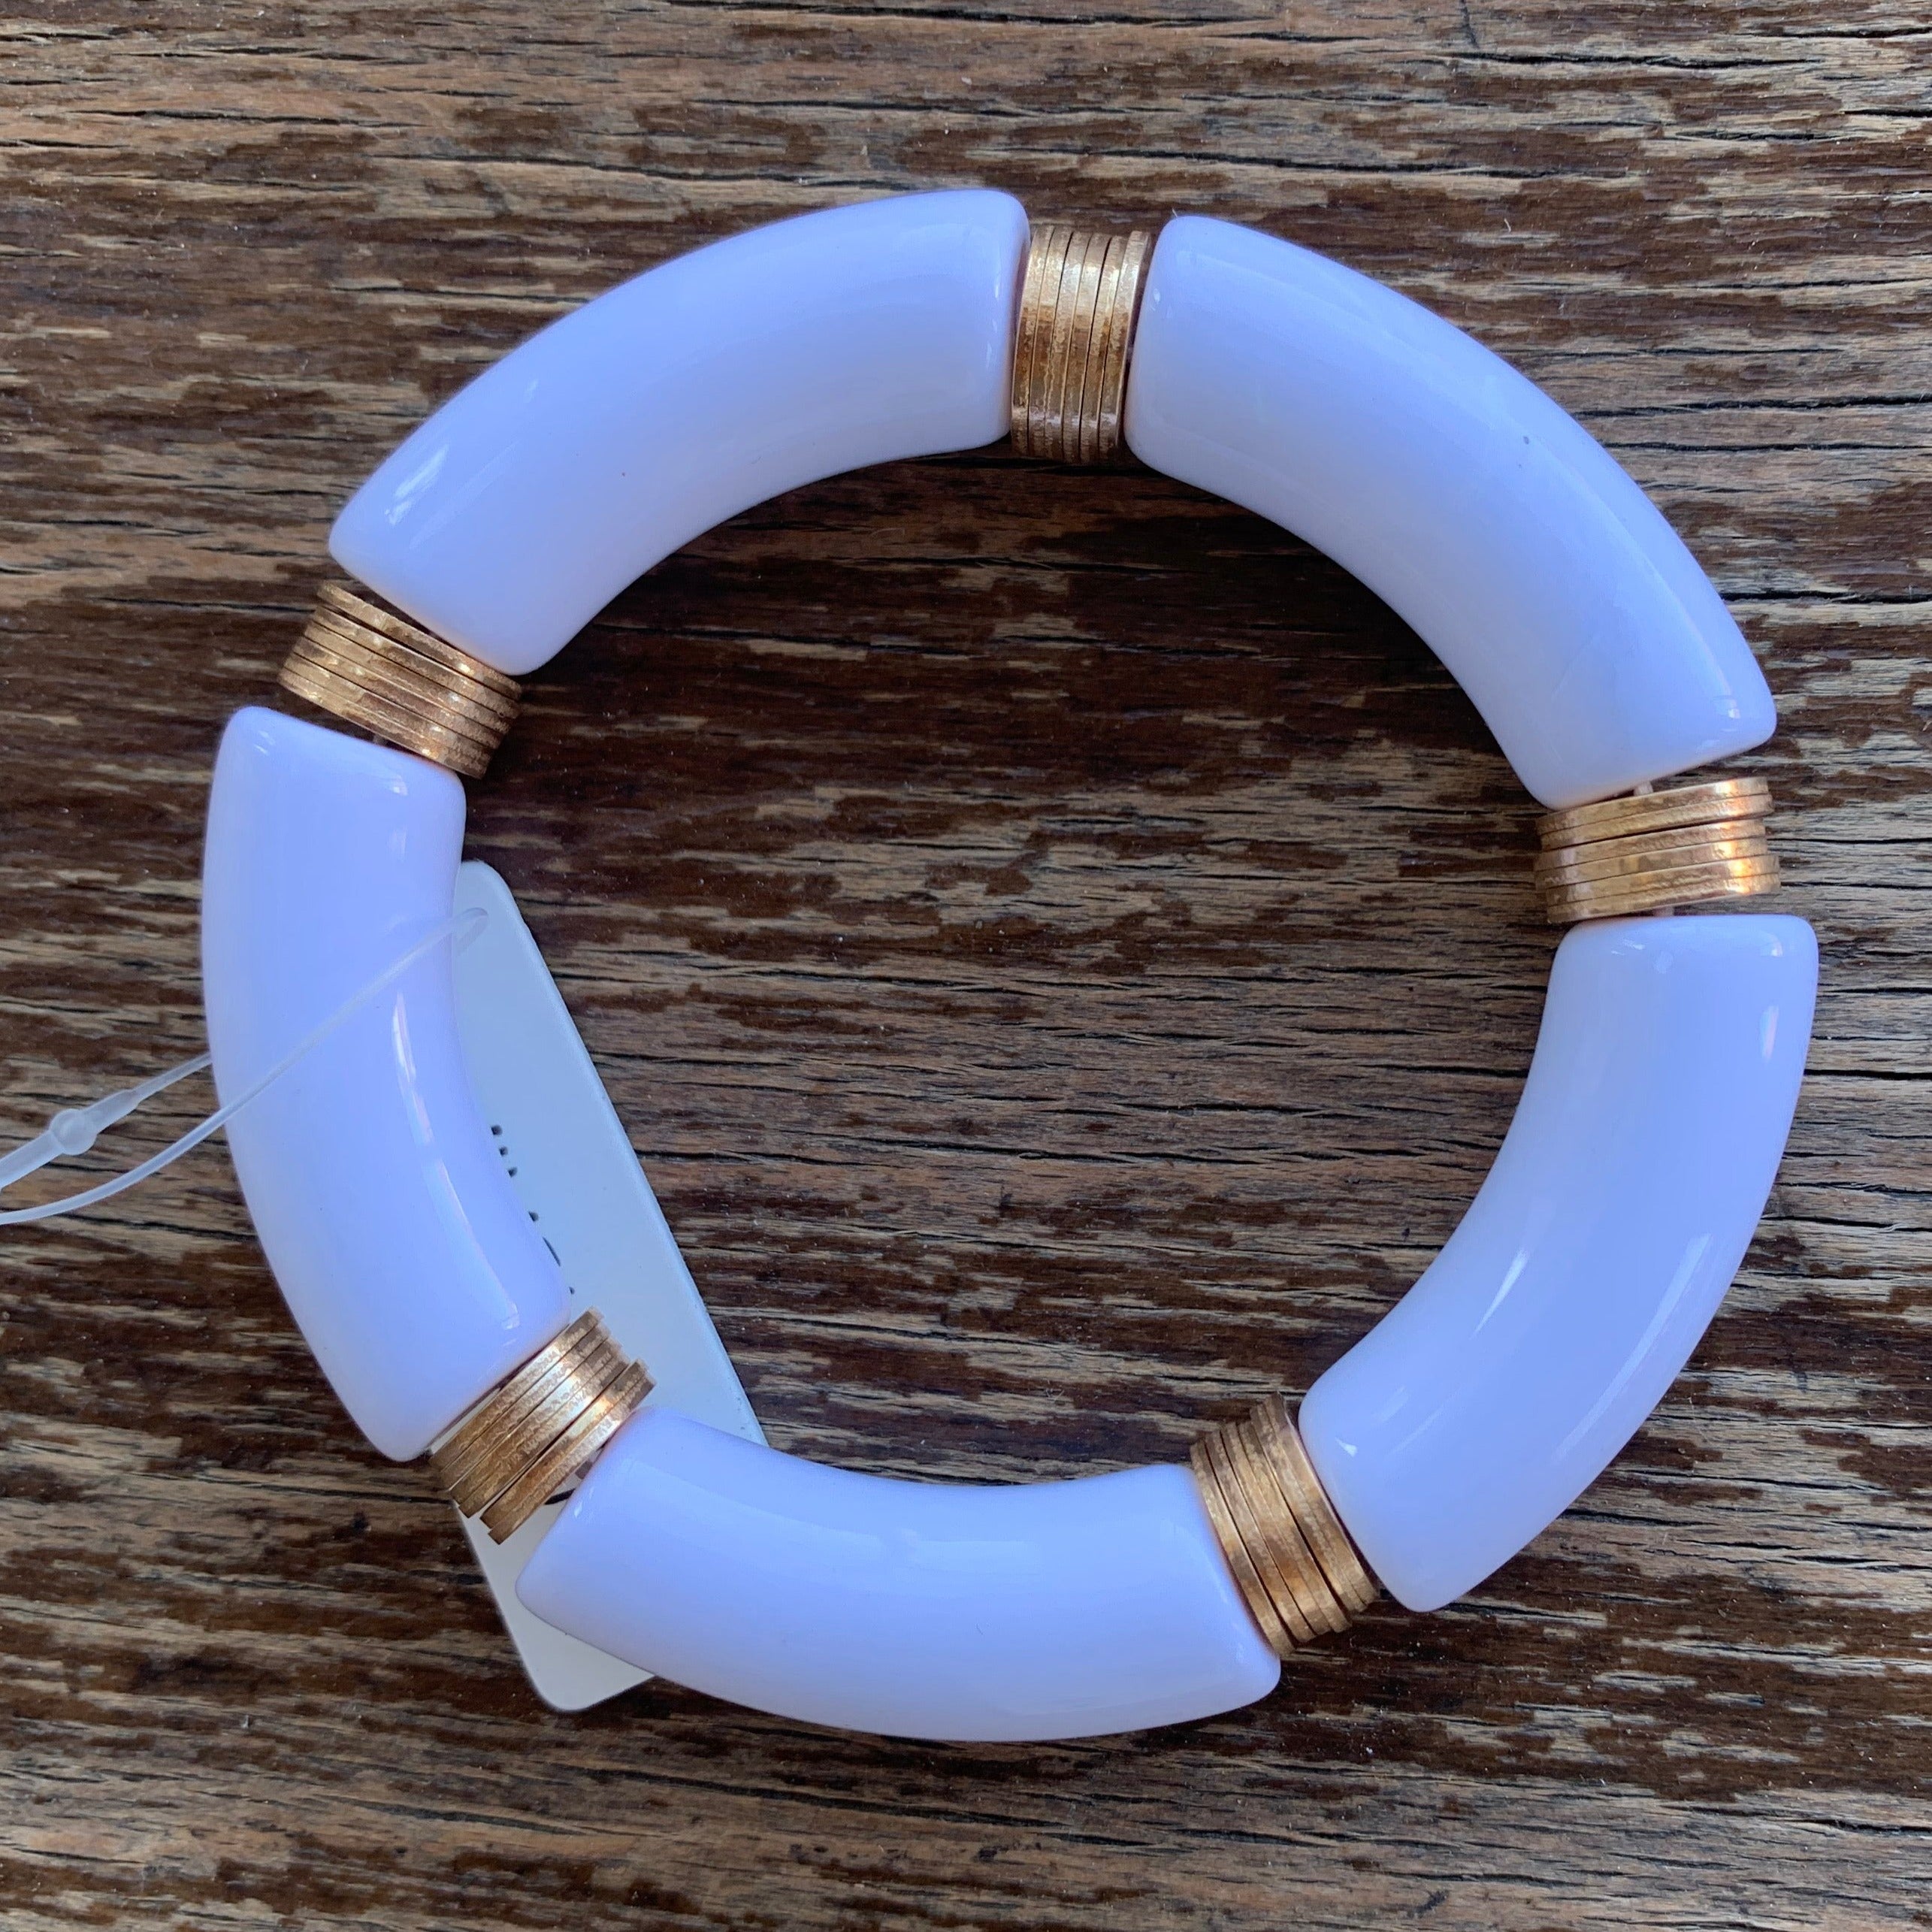 Bamboo Tube Stretch Bracelet - White with Gold accents